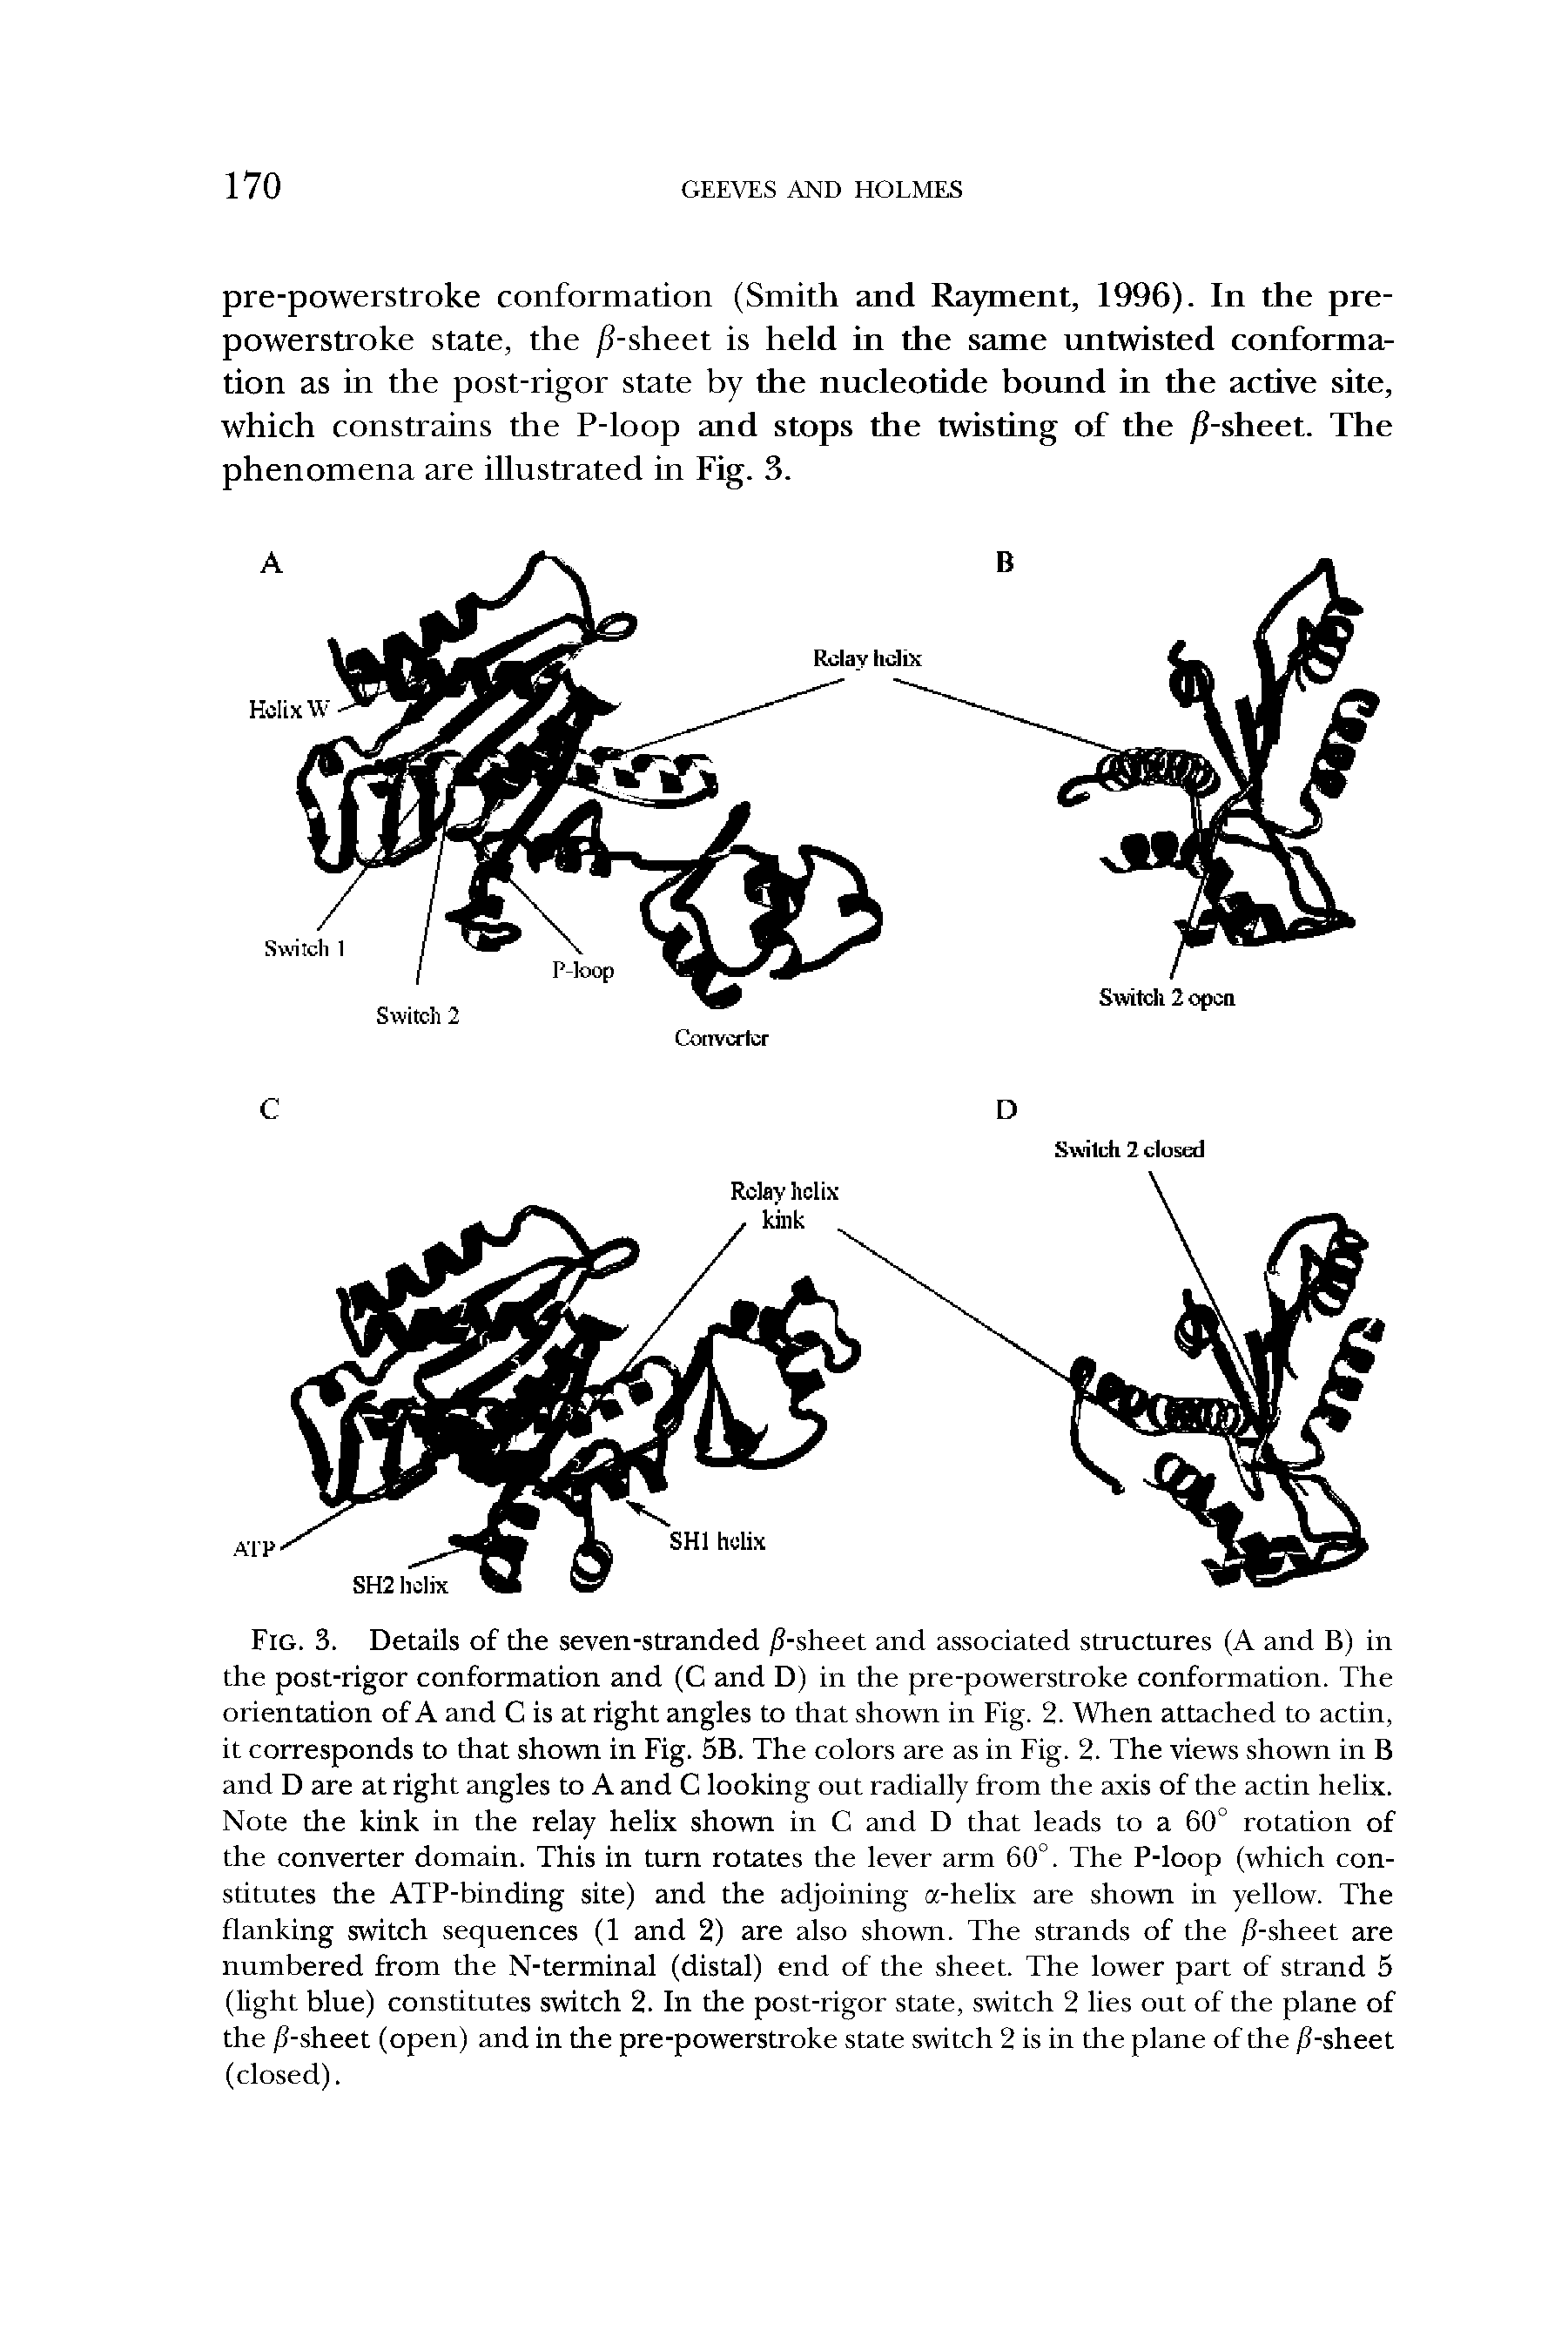 Fig. 3. Details of the seven-stranded /1-sheet and associated structures (A and B) in the post-rigor conformation and (C and D) in the pre-powerstroke conformation. The orientation of A and C is at right angles to that shown in Fig. 2. When attached to actin, it corresponds to that shown in Fig. 5B. The colors are as in Fig. 2. The views shown in B and D are at right angles to A and C looking out radially from the axis of the actin helix. Note the kink in the relay helix shown in C and D that leads to a 60° rotation of the converter domain. This in turn rotates the lever arm 60°. The P-loop (which constitutes the ATP-binding site) and the adjoining a-helix are shown in yellow. The flanking switch sequences (1 and 2) are also shown. The strands of the /1-sheet are numbered from the N-terminal (distal) end of the sheet. The lower part of strand 5 (light blue) constitutes switch 2. In the post-rigor state, switch 2 lies out of the plane of the /1-sheet (open) and in the pre-powerstroke state switch 2 is in the plane of the /1-sheet (closed).